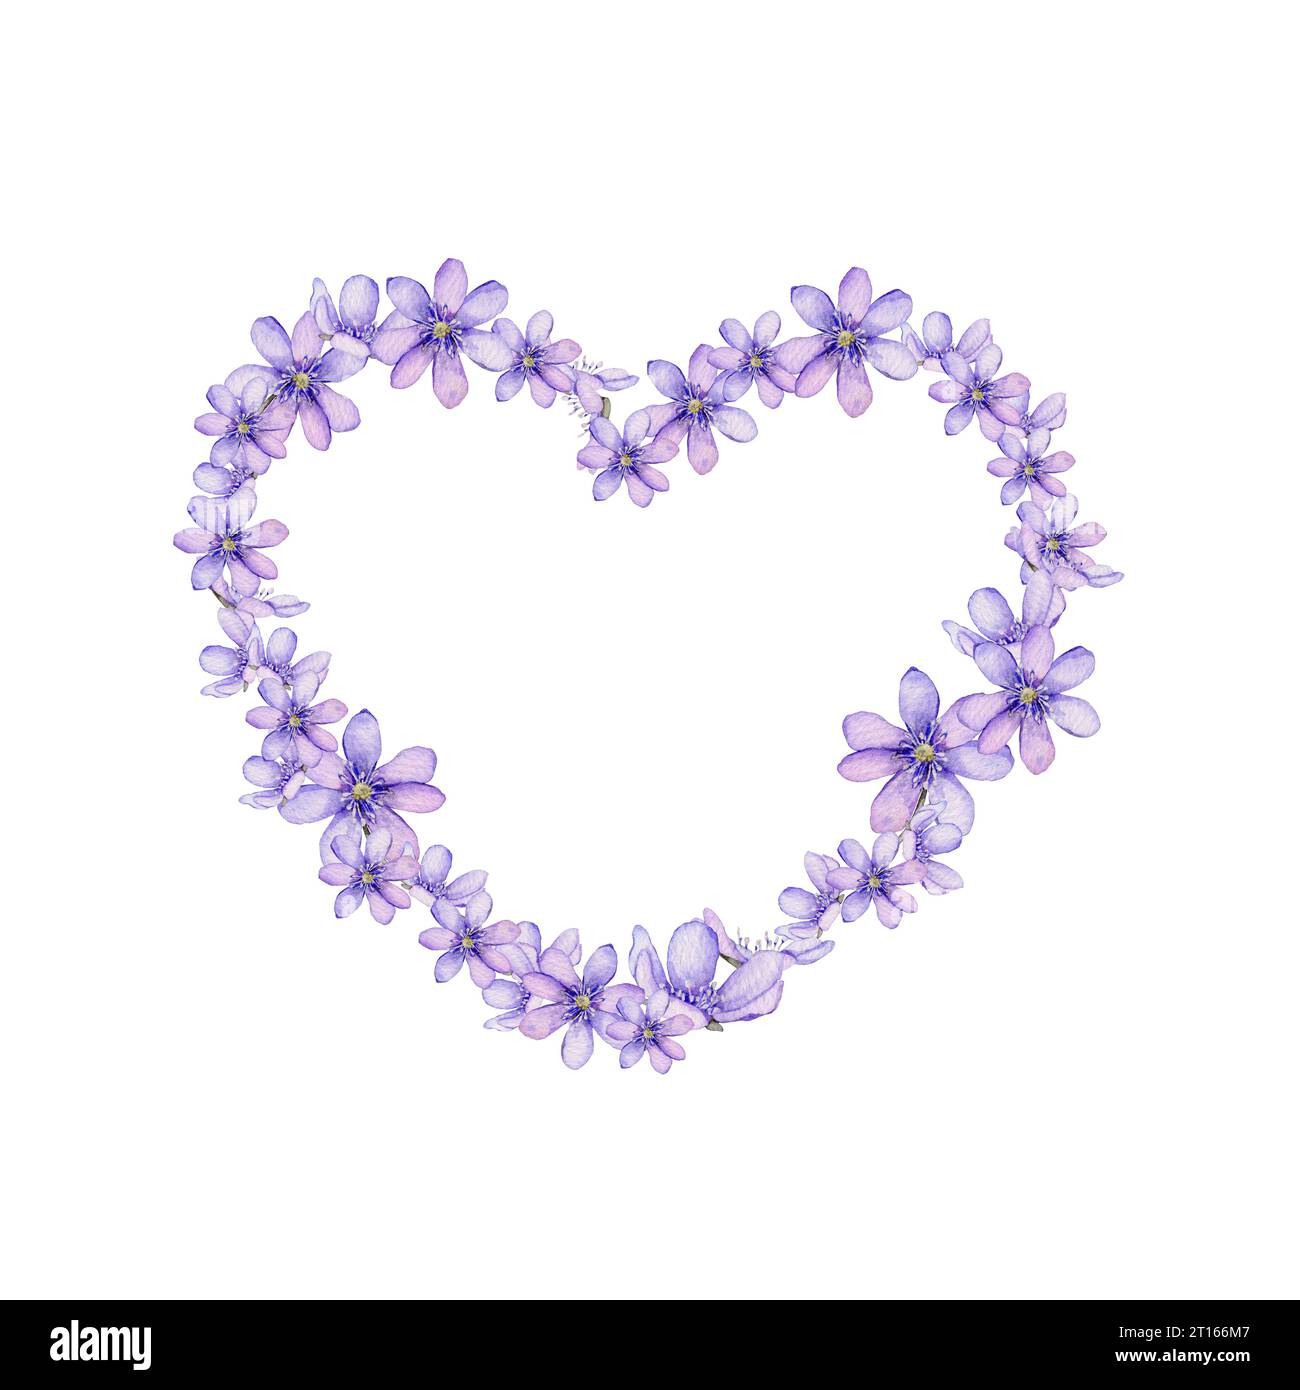 Watercolor heart with flowers isolated on white background. Scilla. Coppice, hepatica - first spring flowers. Illustration of delicate lilac flowers Stock Photo